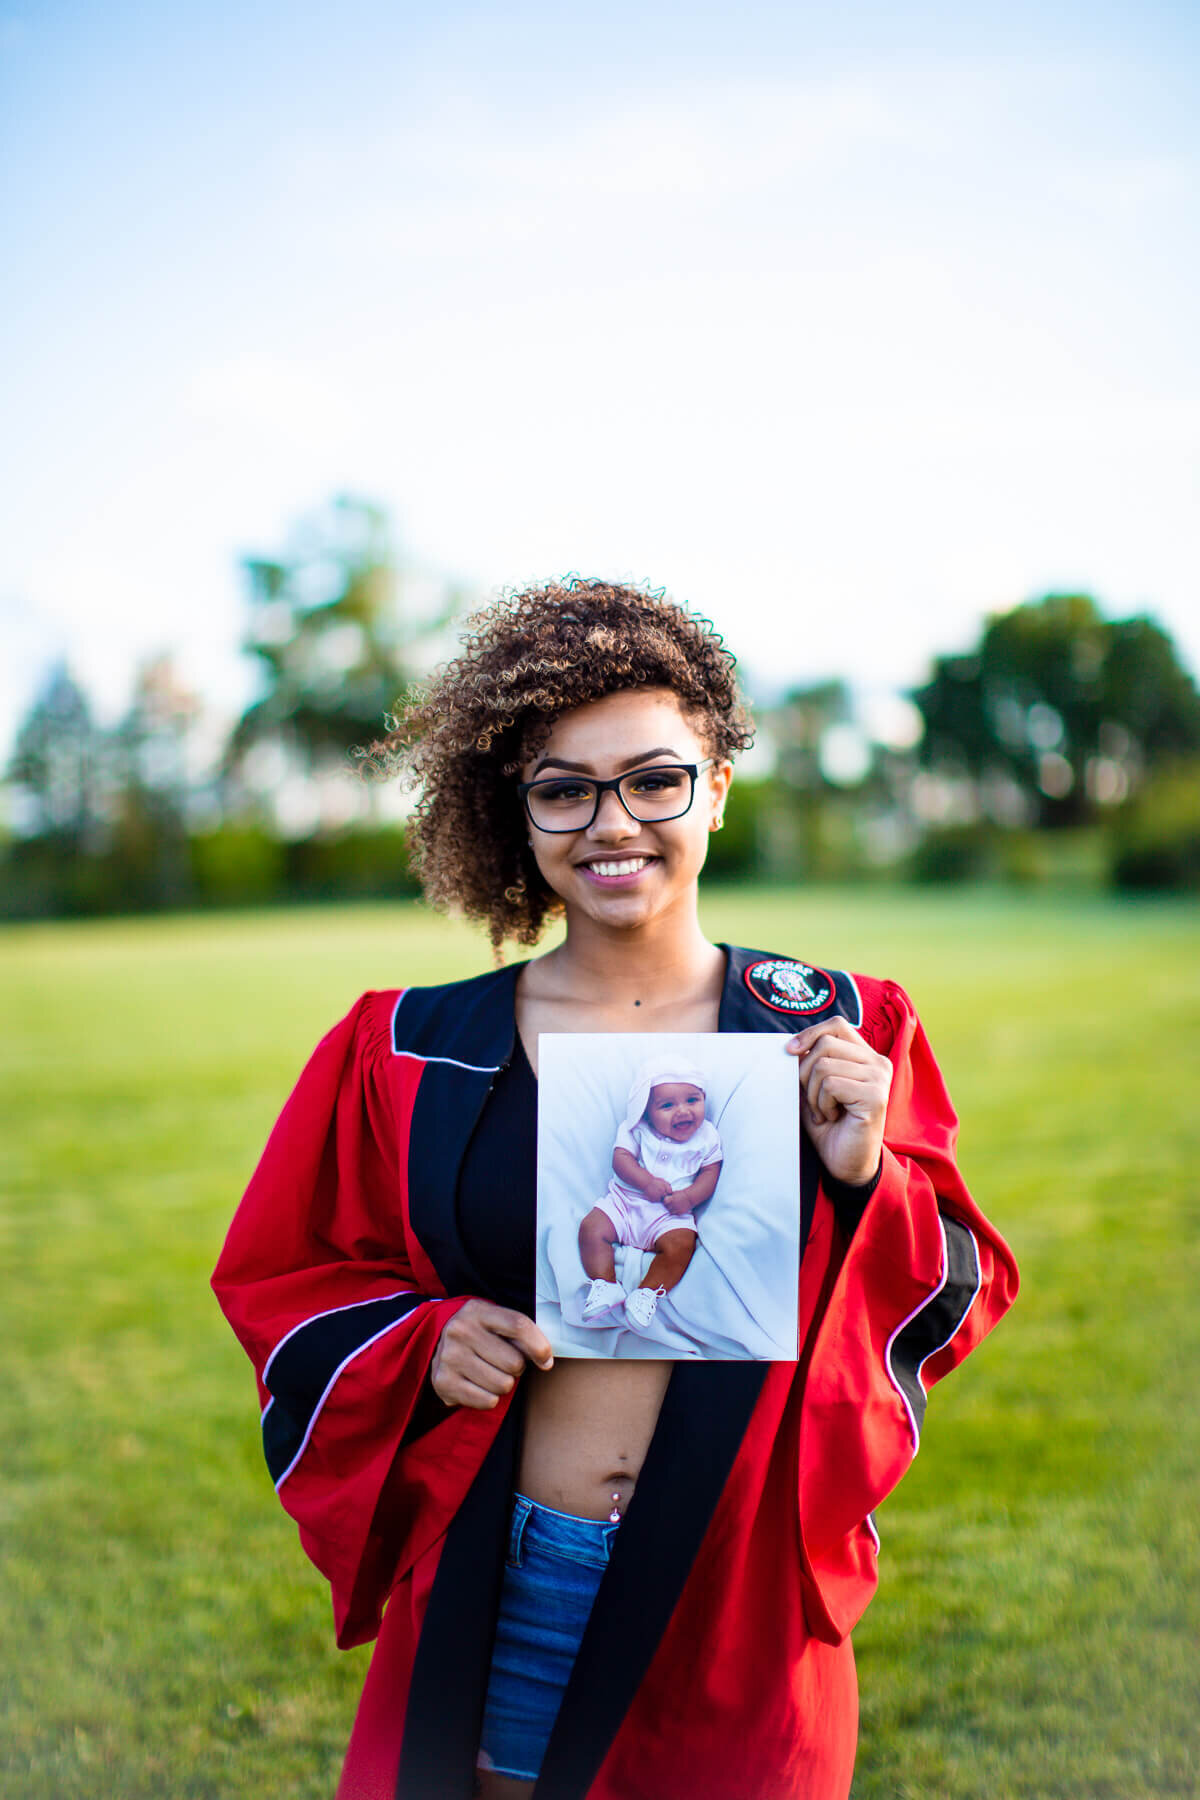 Girl in her graduation gown holding an image of herself as a child